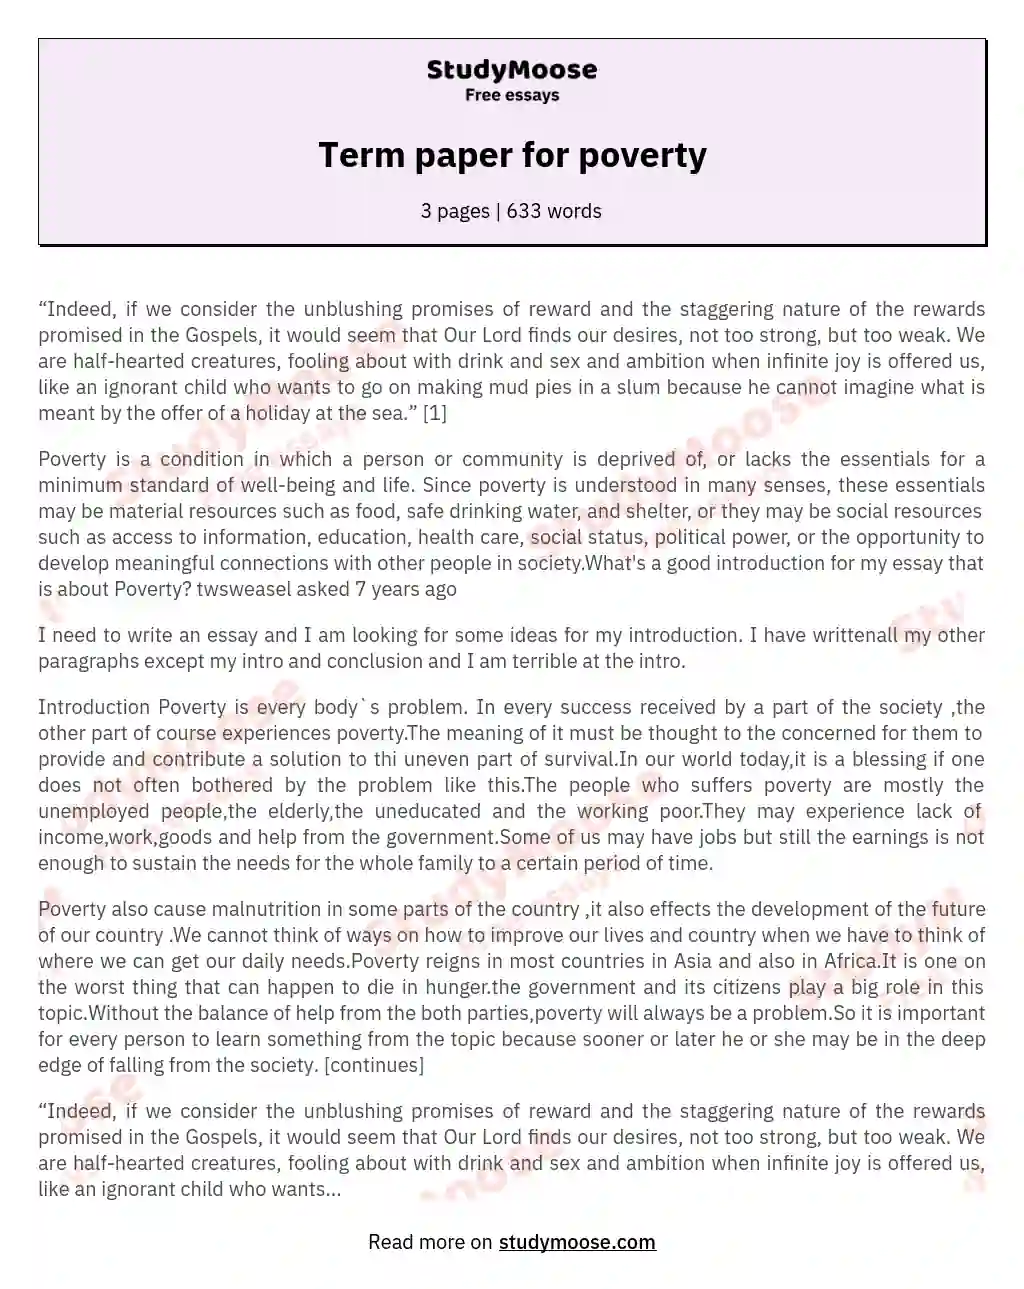 Term paper for poverty essay